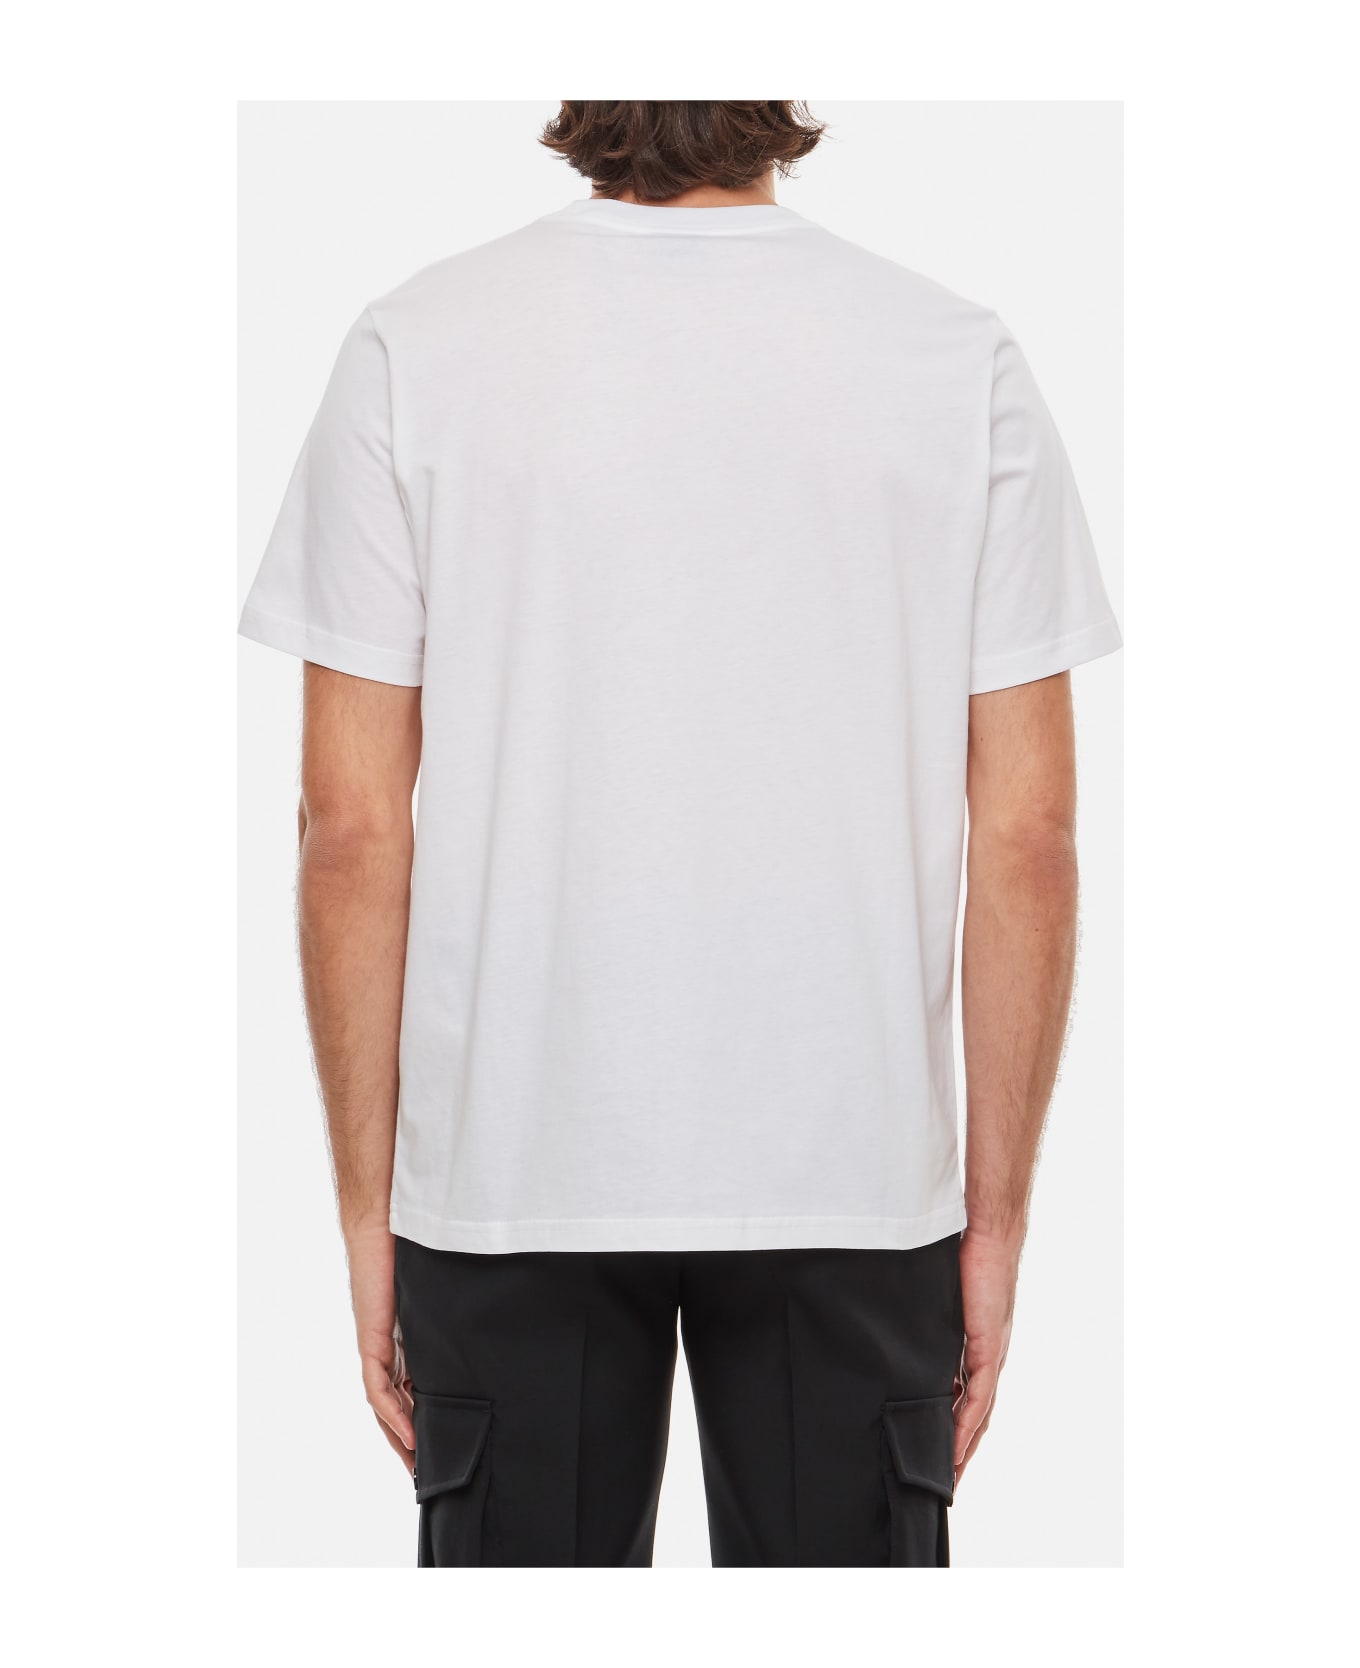 PS by Paul Smith Cyclist T-shirt - White